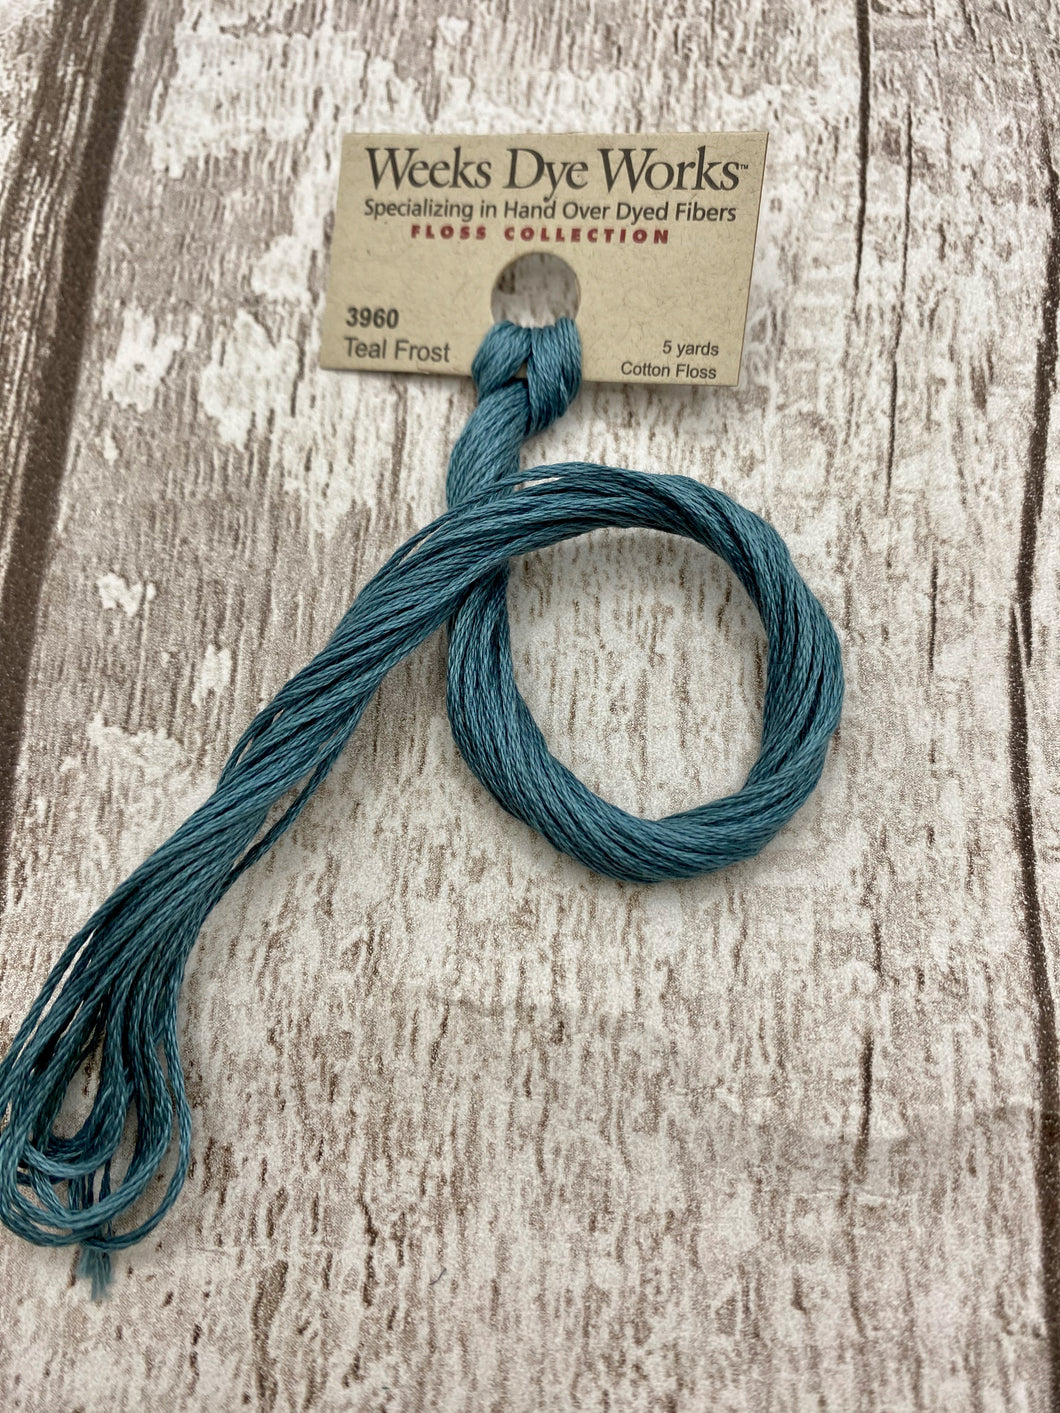 Teal Frost (#3960) Weeks Dye Works, 6-strand cotton floss